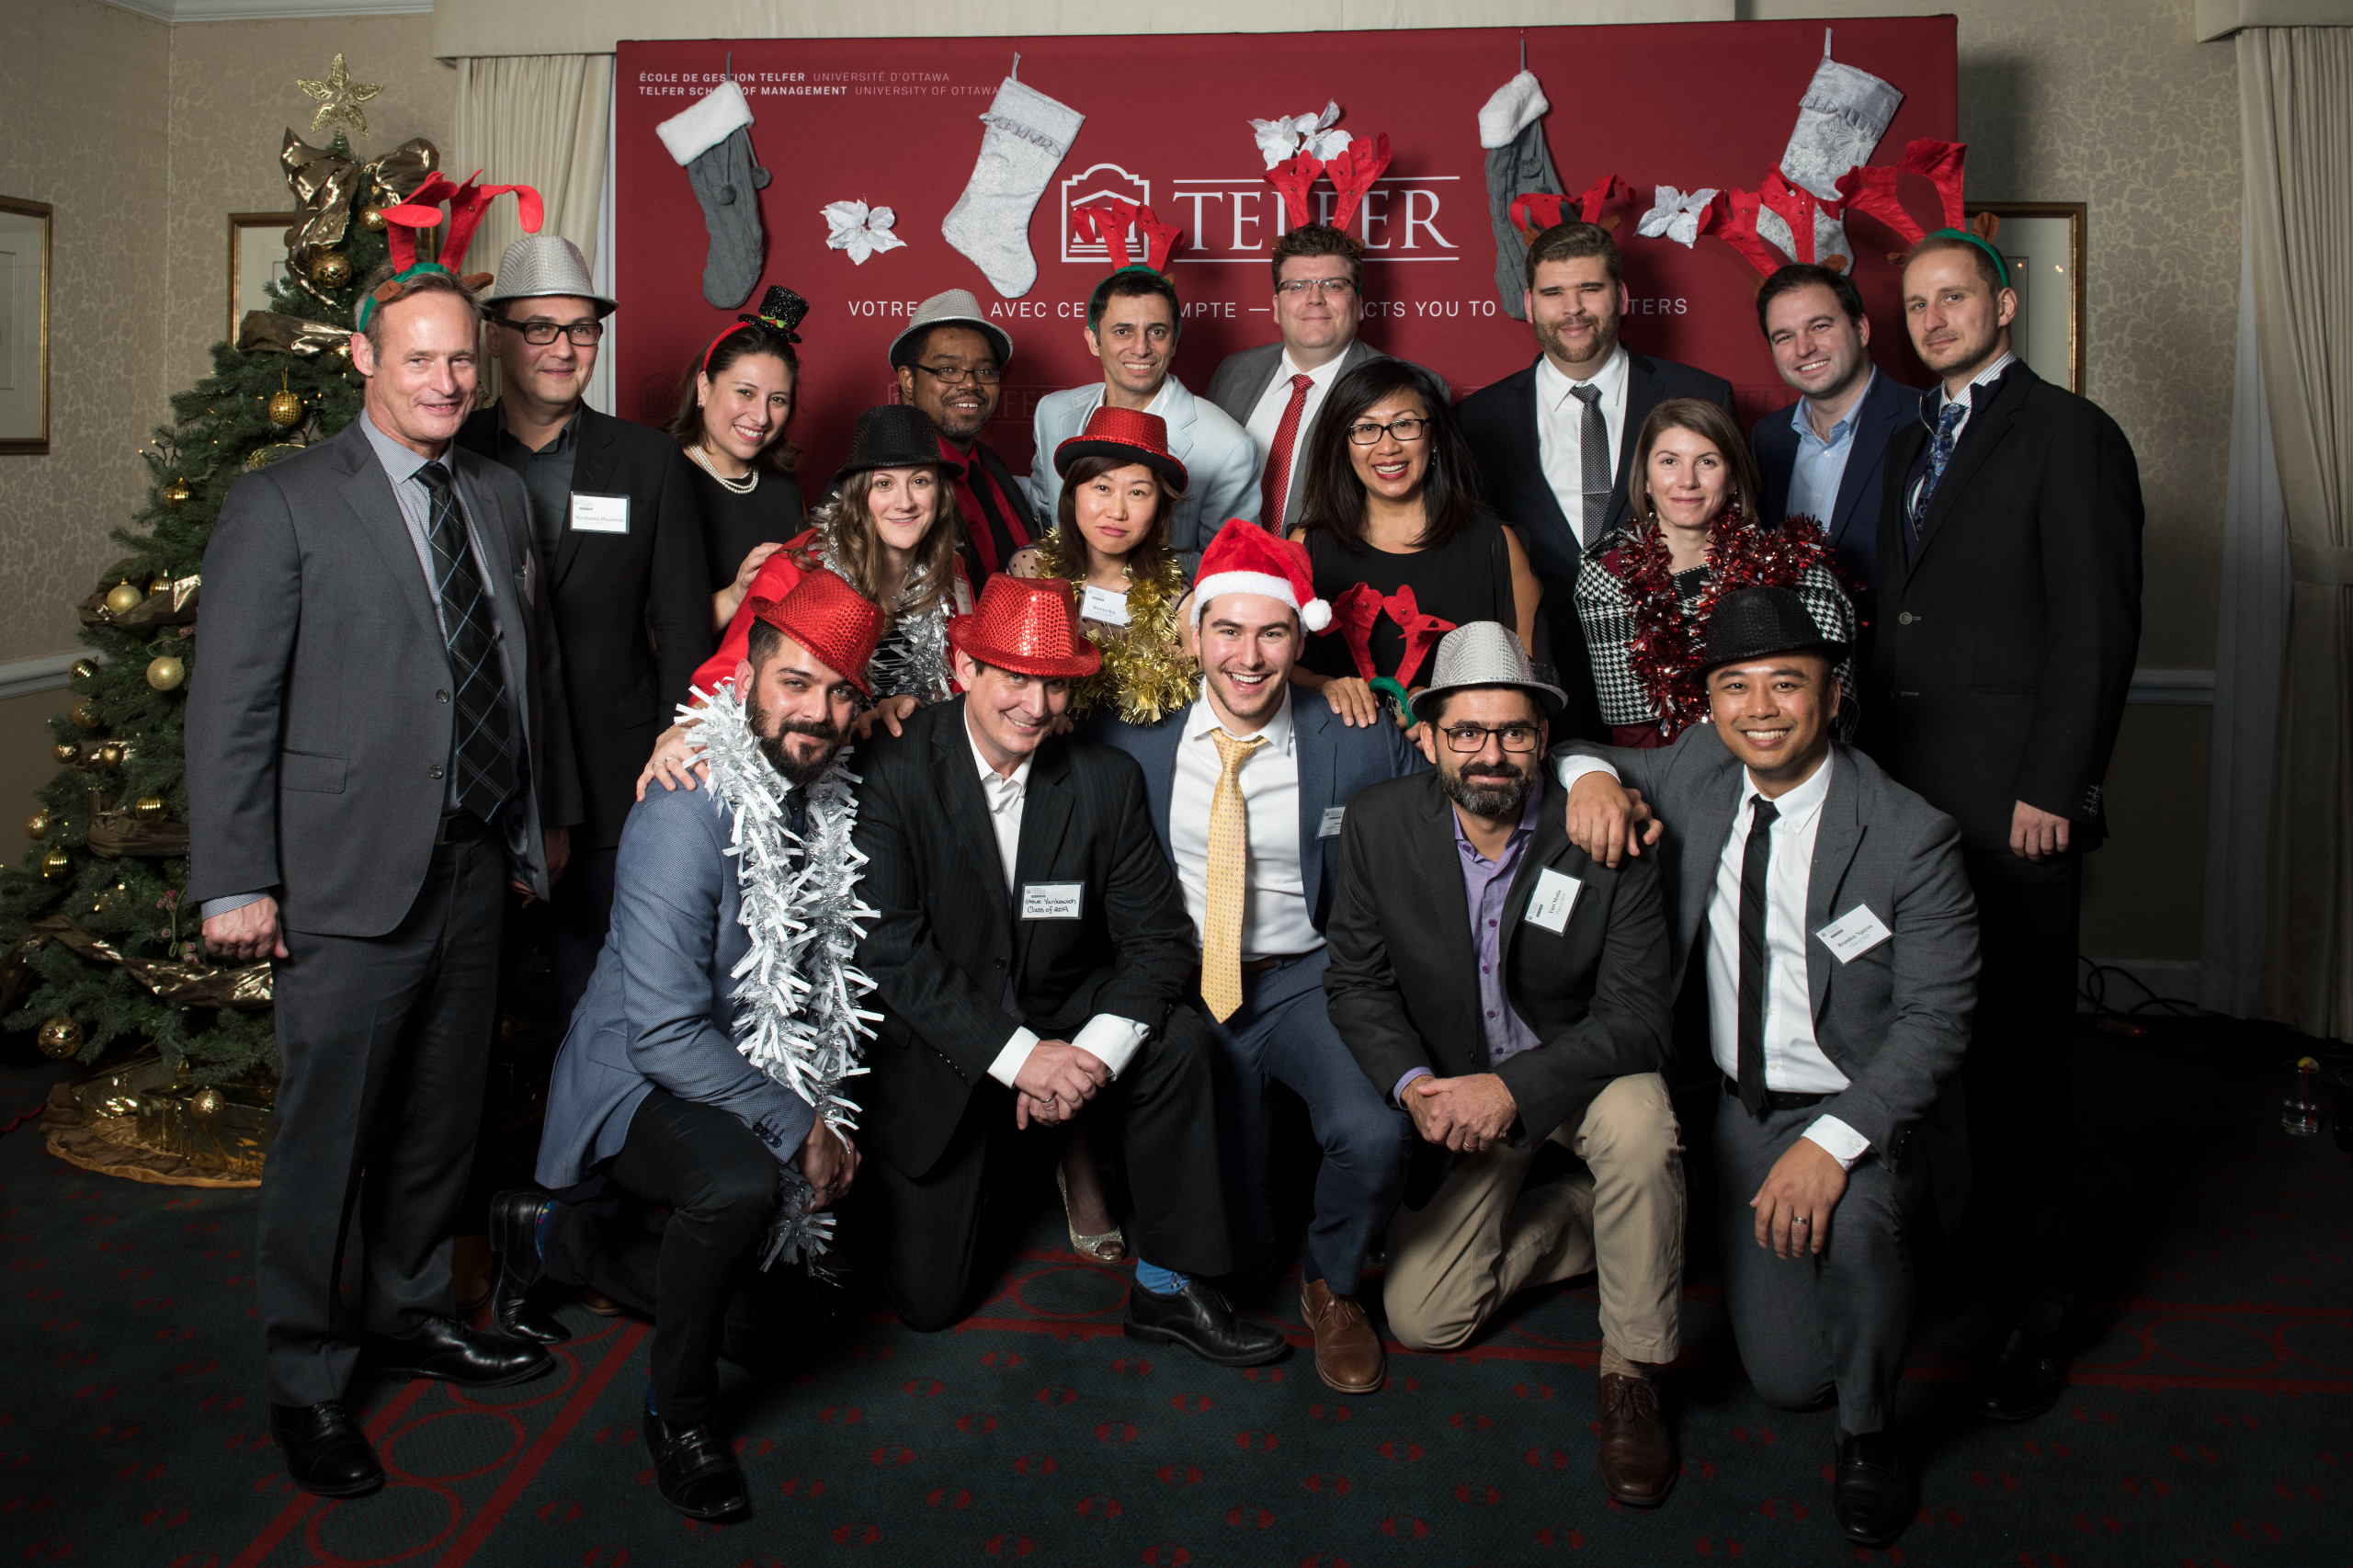 Original photo of a group Telfer EMBA alumni wearing holiday costume headwear posing in front of a burgundy Telfer backdrop at the annual holiday party